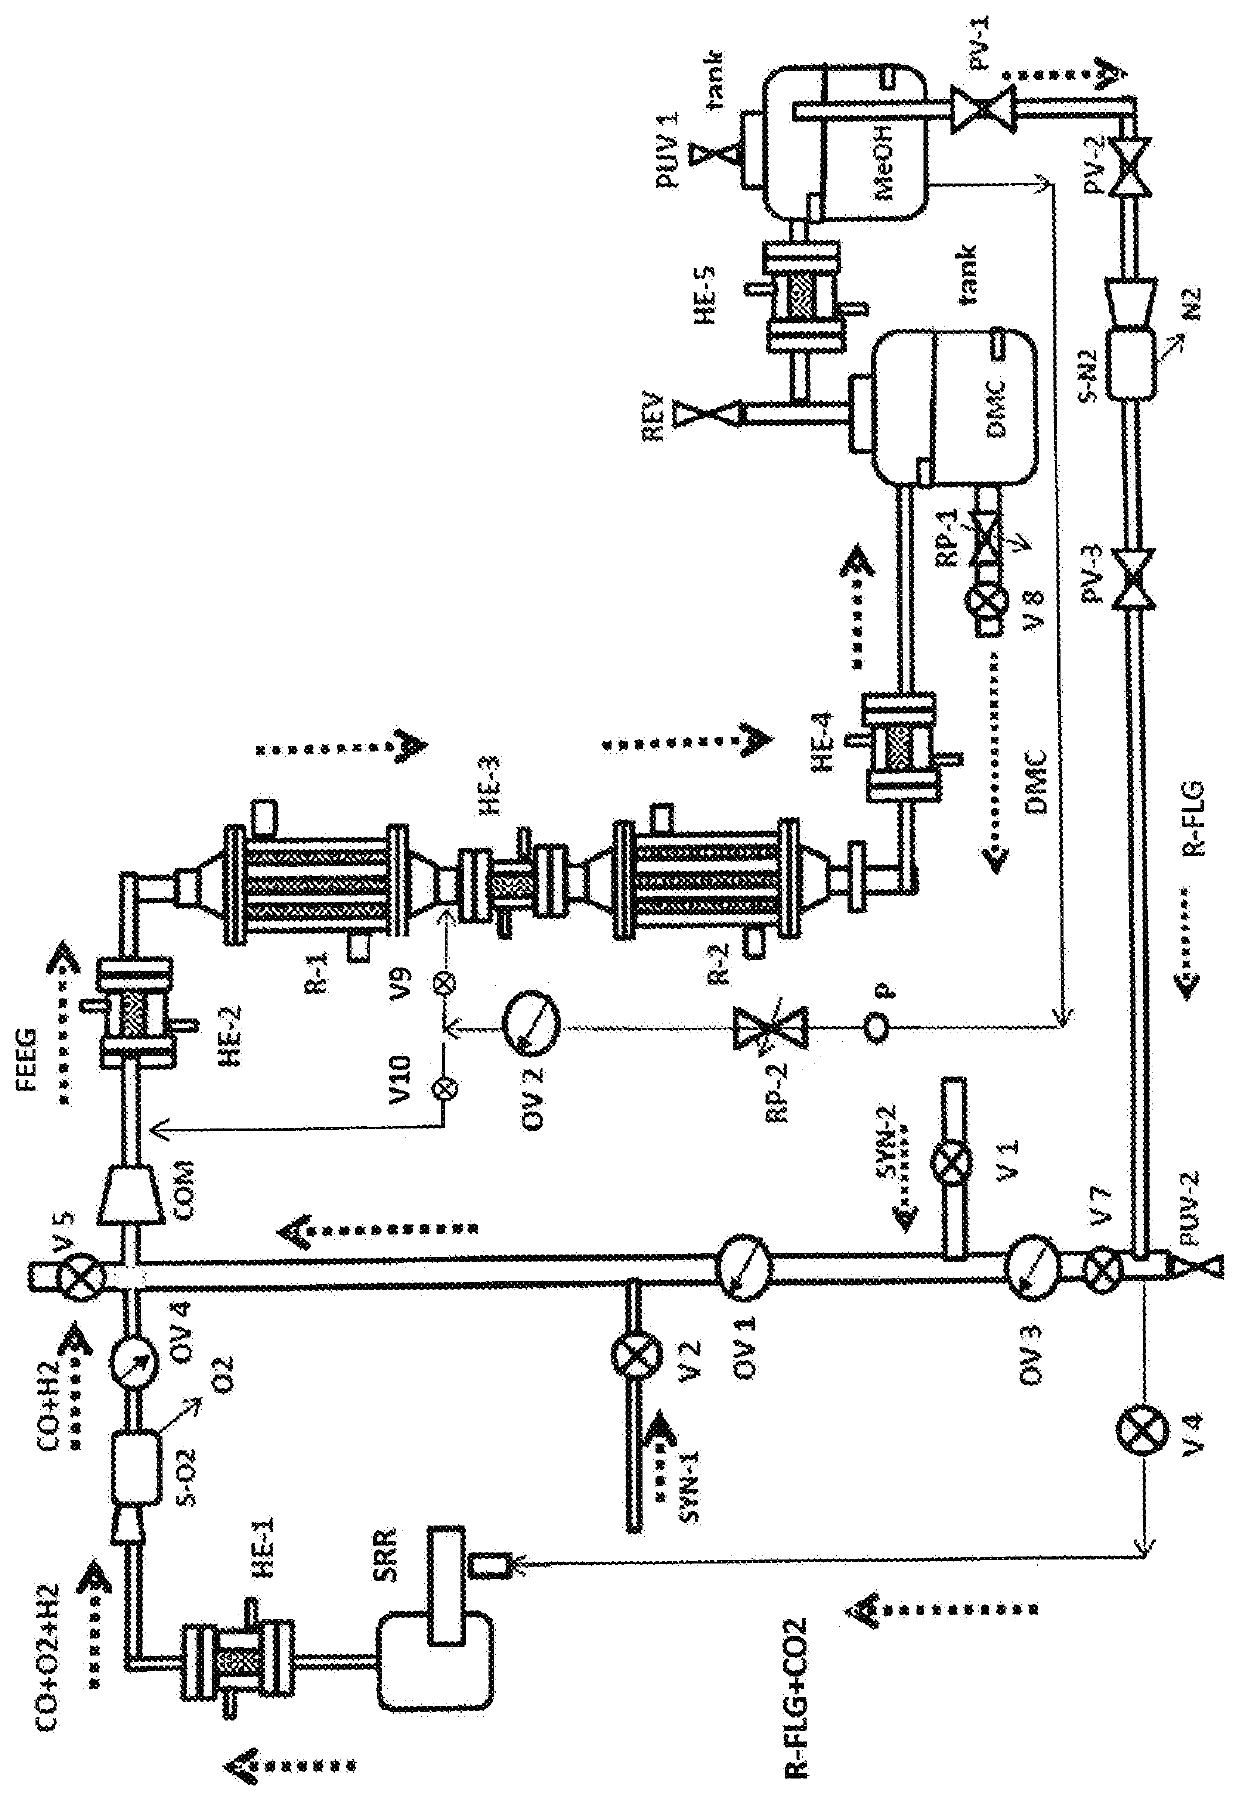 Apparatus and process for producing dimethyl carbonate